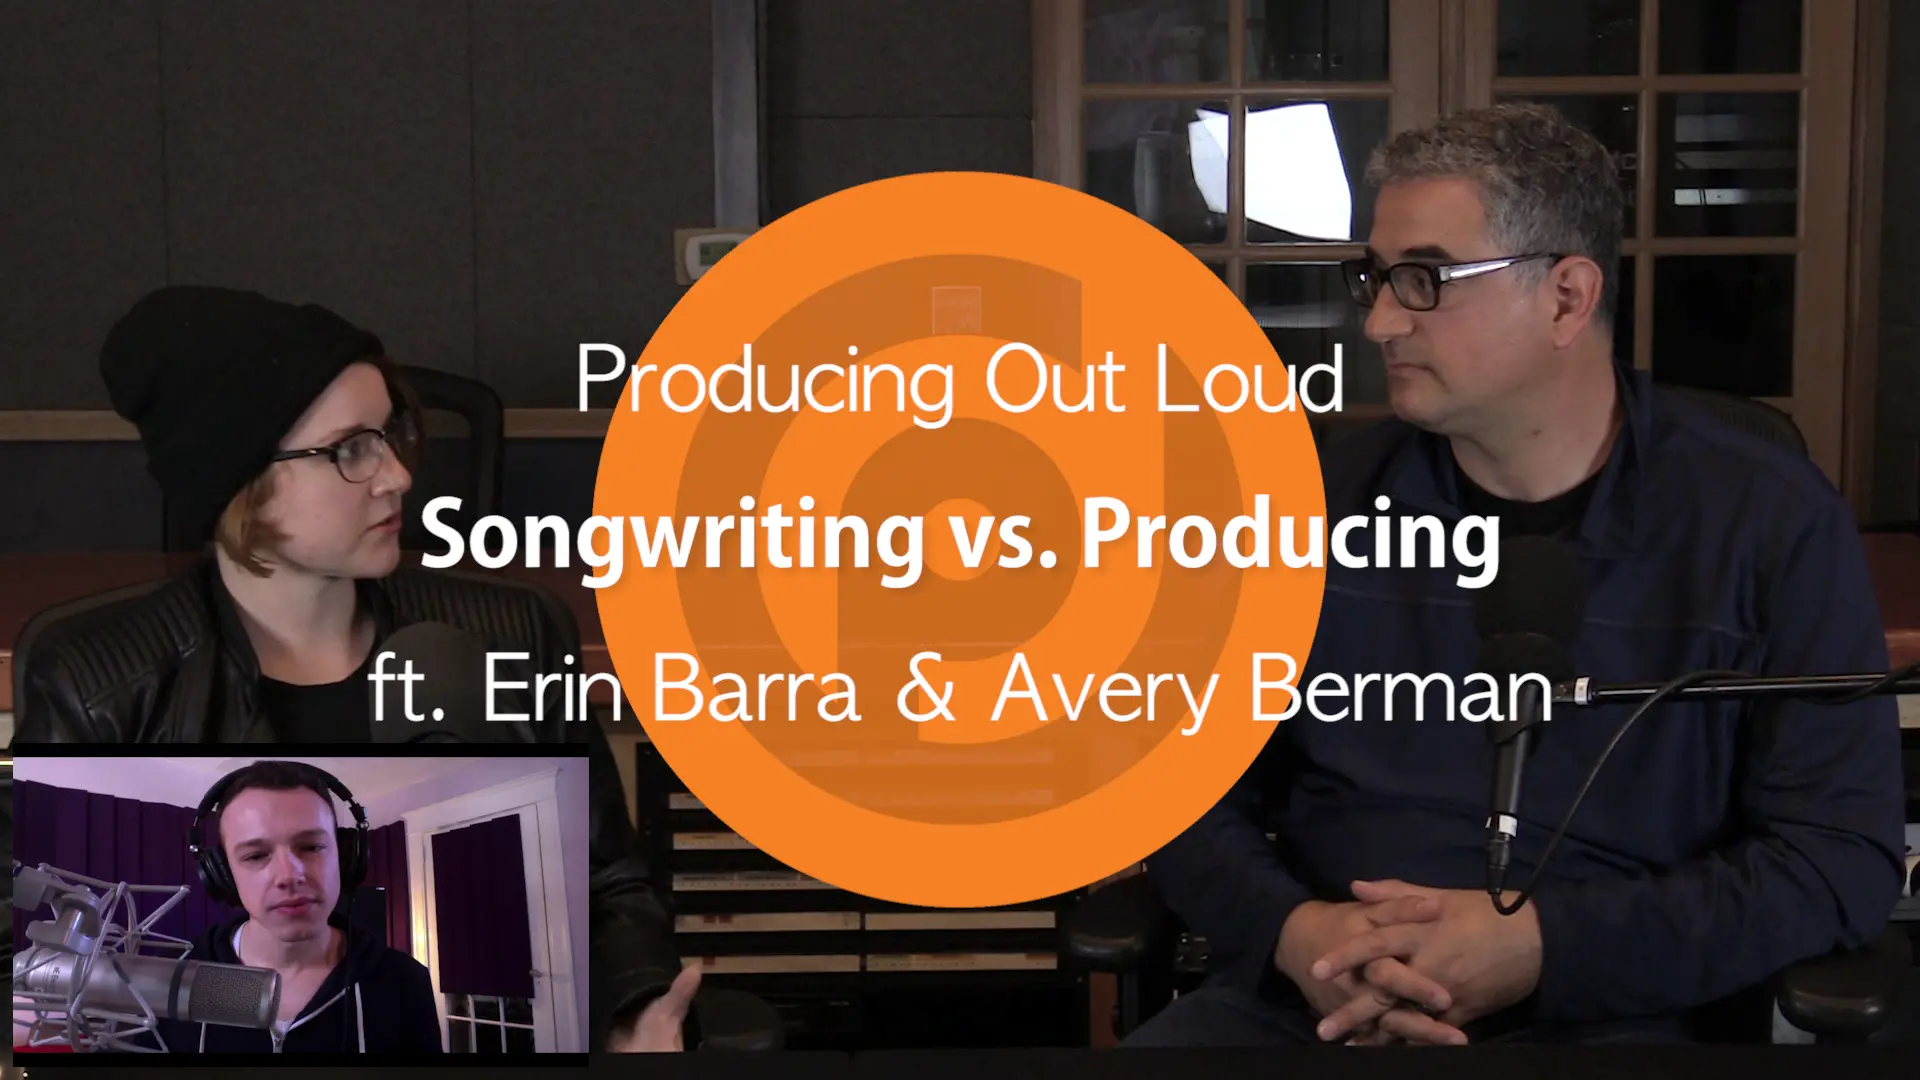 Two music producers in a recording studio, beatmaking and discussing the art of songwriting vs producing out loud.